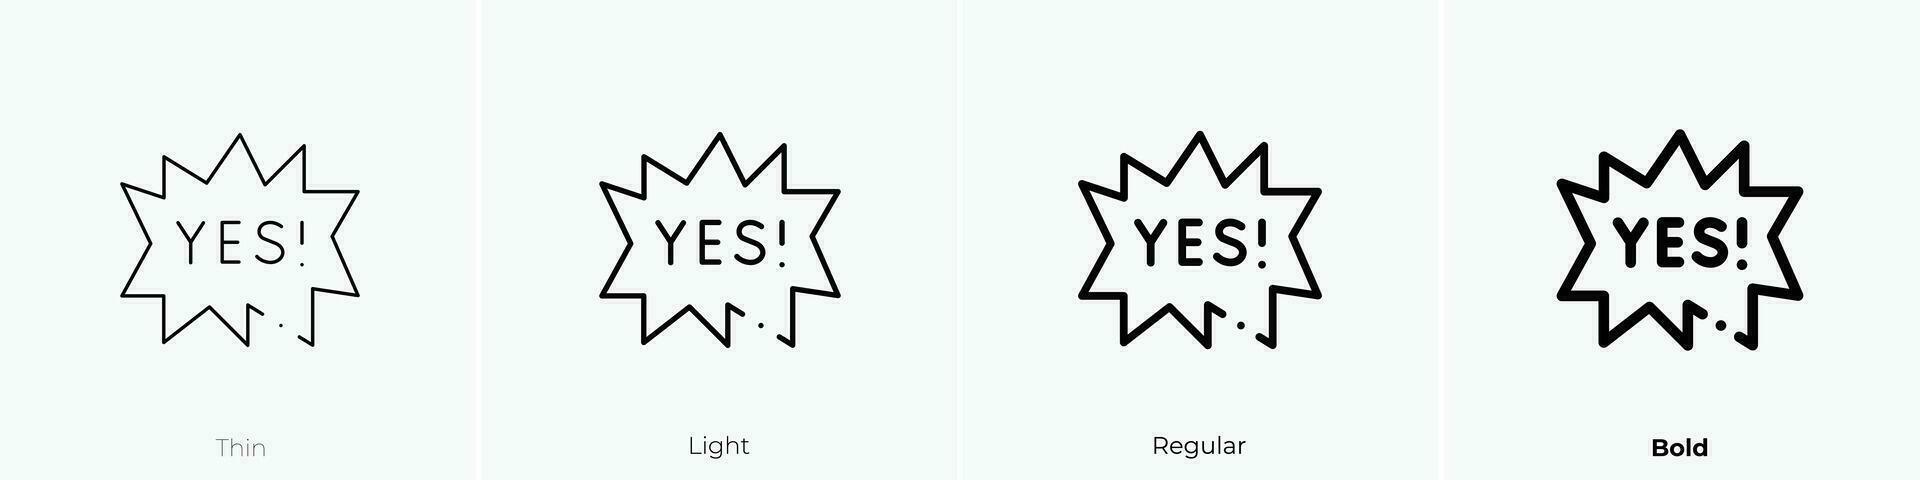 yes icon. Thin, Light, Regular And Bold style design isolated on white background vector